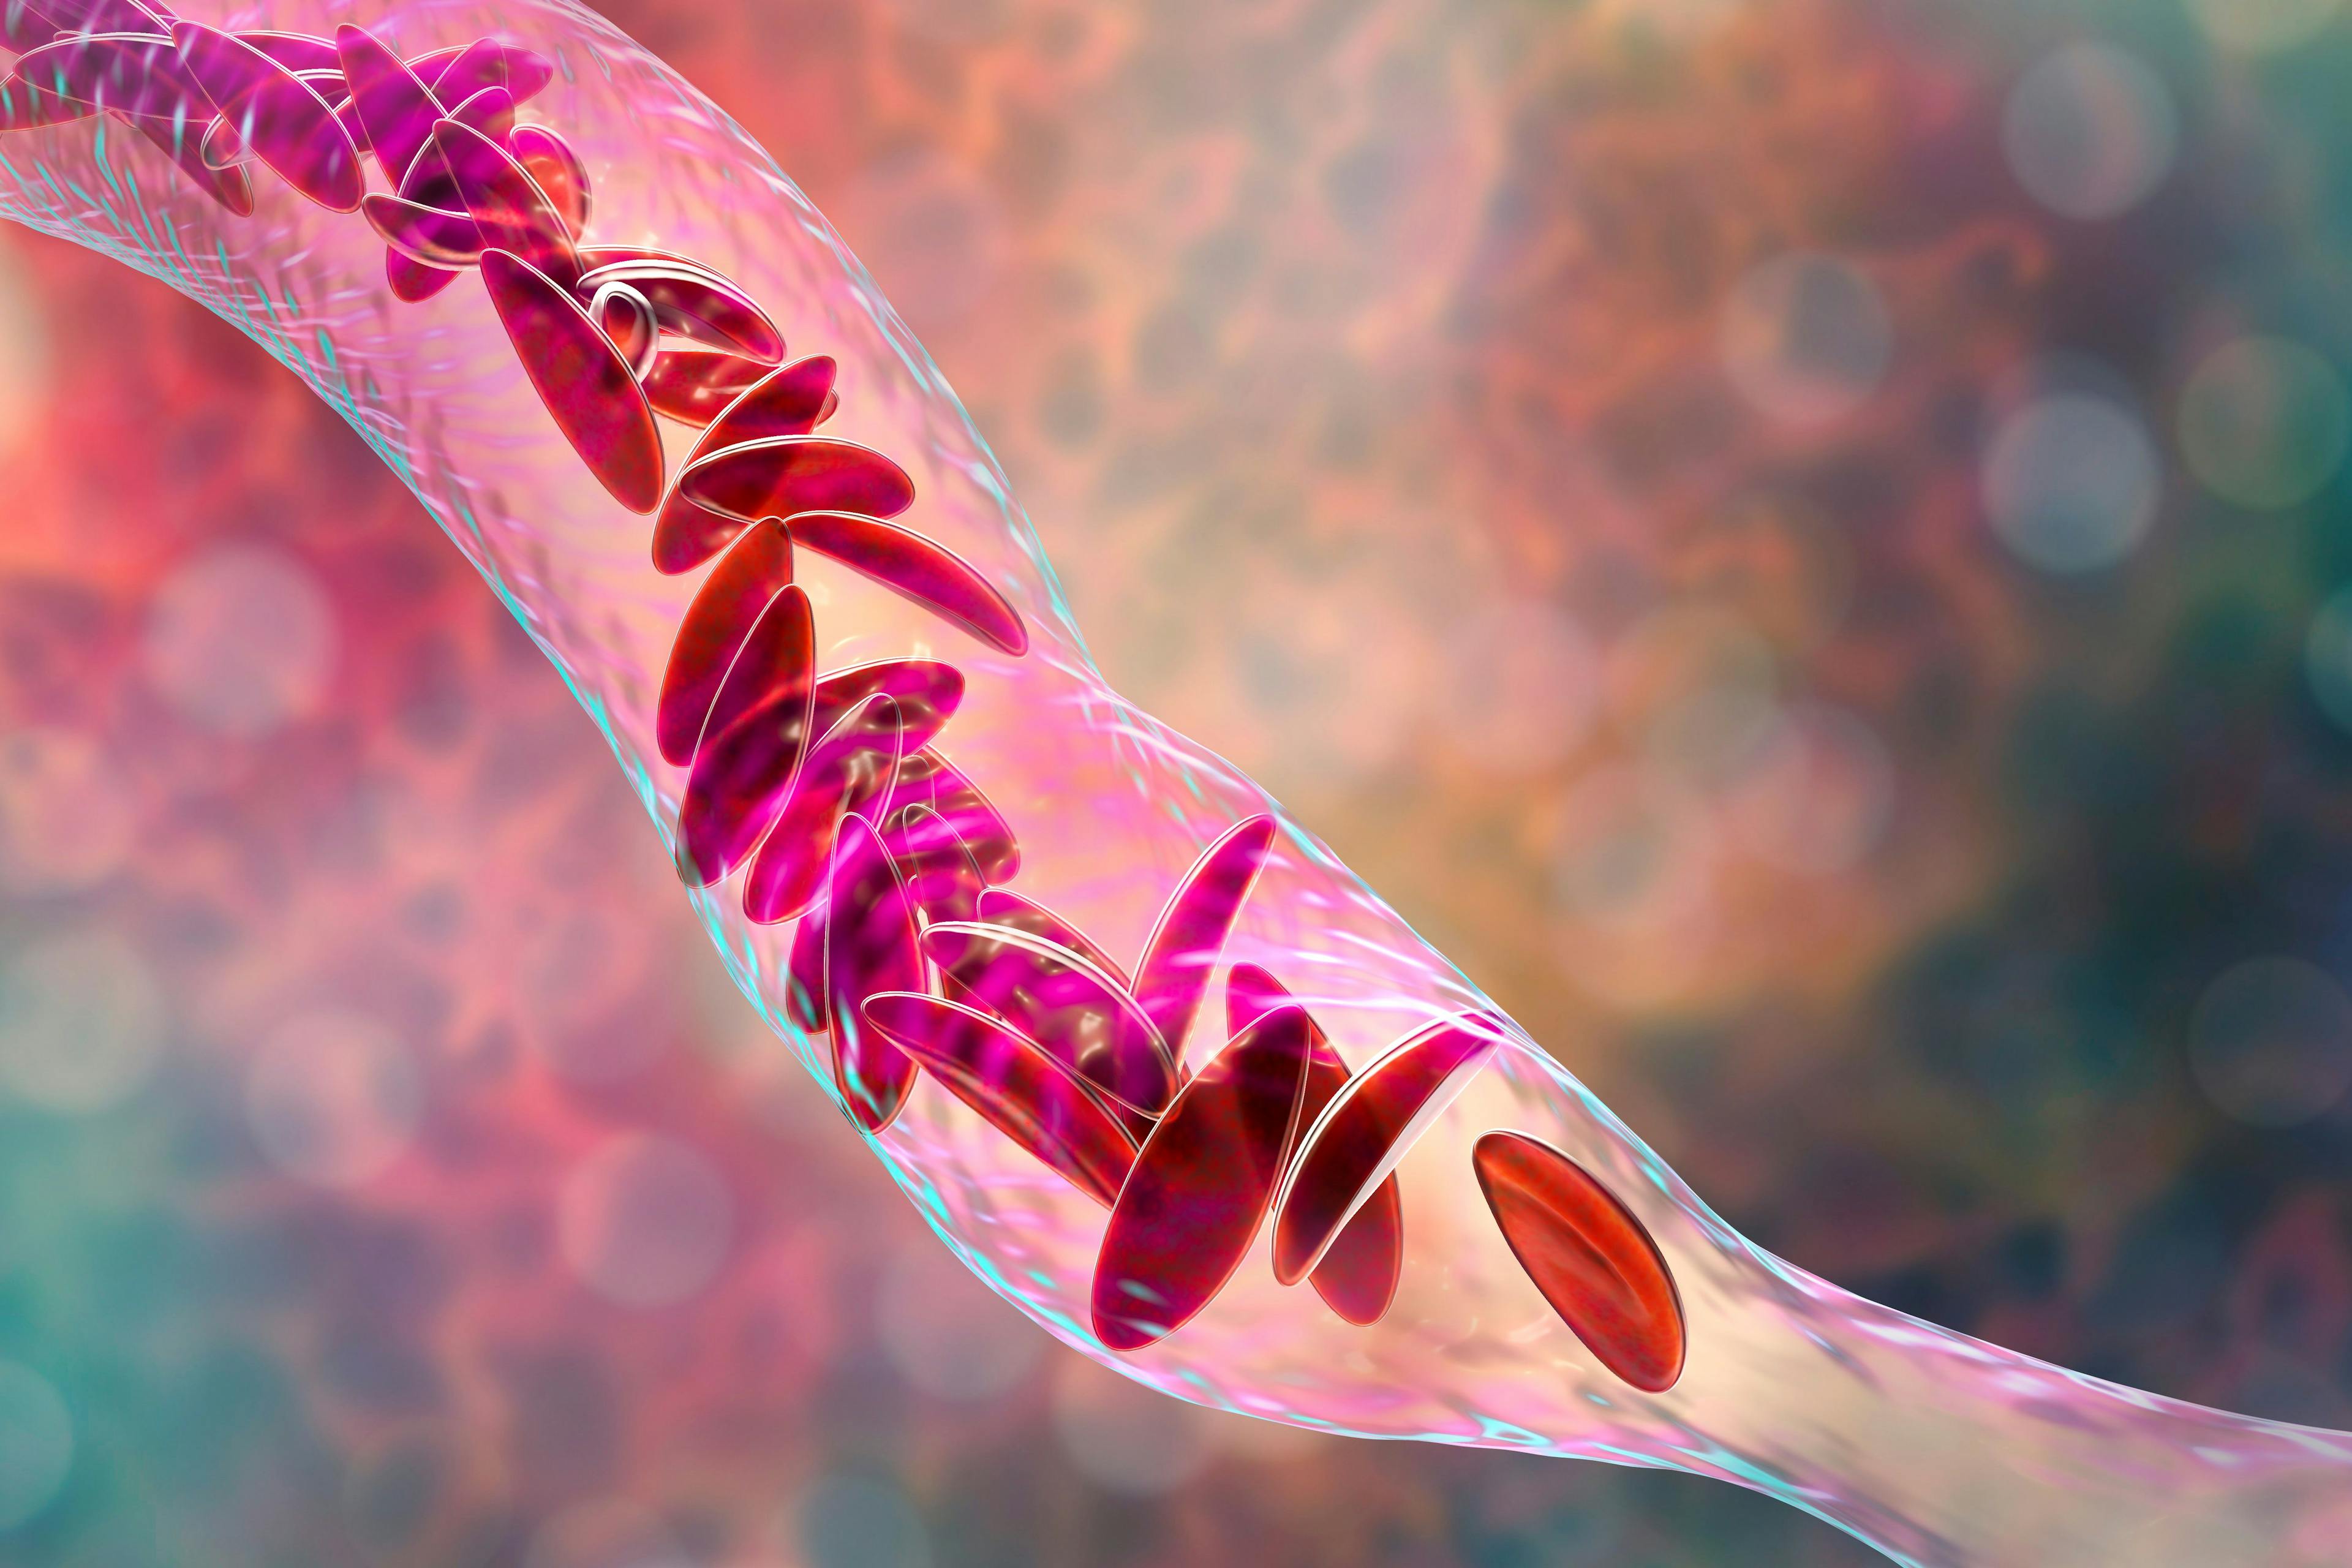 Sickle cell anemia, 3D illustration -- Image credit: Dr_Microbe | stock.adobe.com